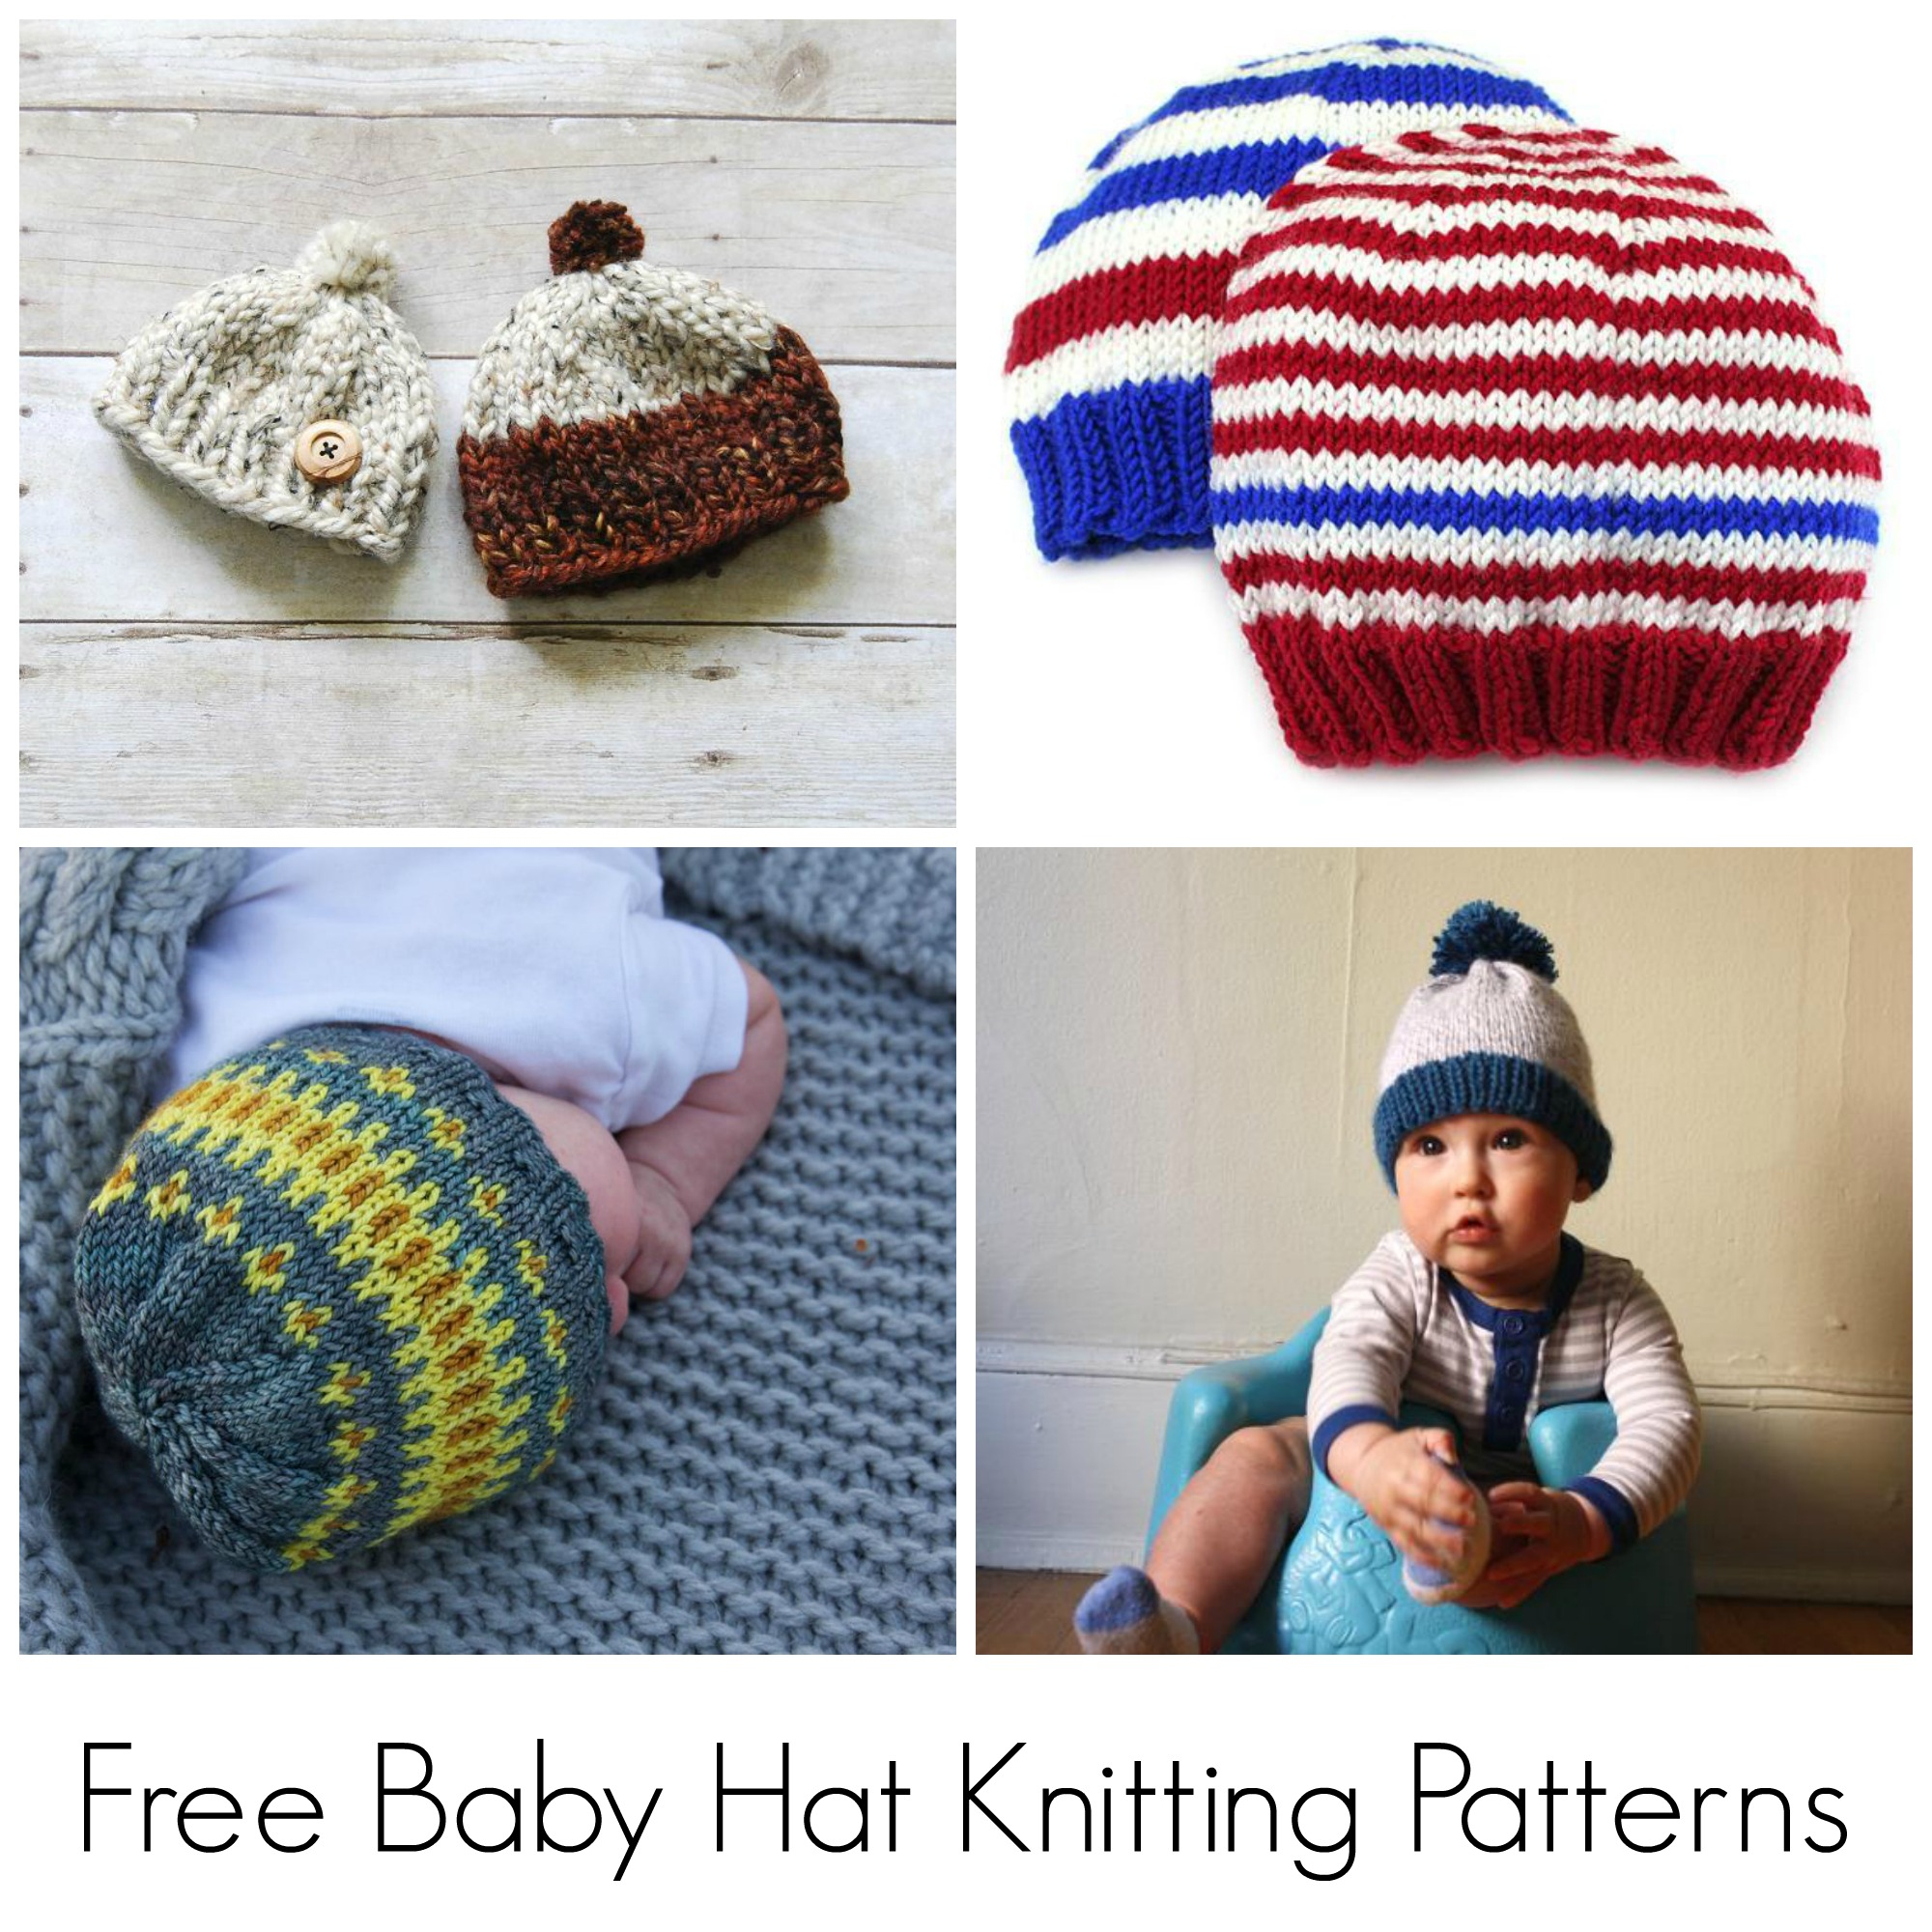 Double Knitting Patterns For Babies Free 10 Free Knitting Patterns For Ba Hats On Craftsy